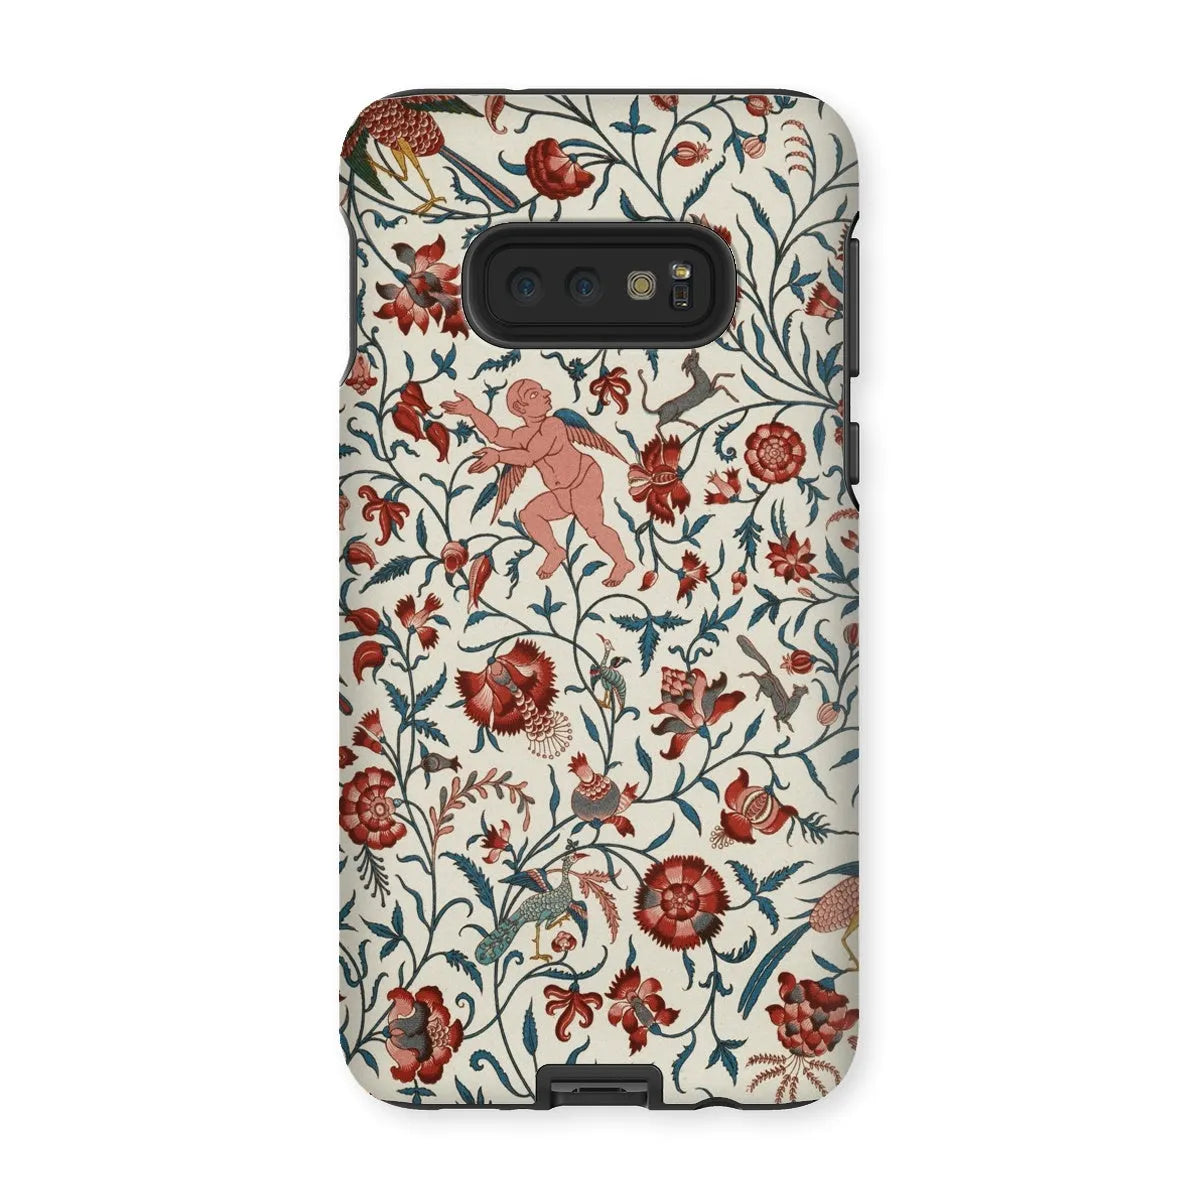 Persian Pattern From L’ornement Polychrome By Auguste Racinet Tough Phone Case - Samsung Galaxy S10e / Matte - Mobile